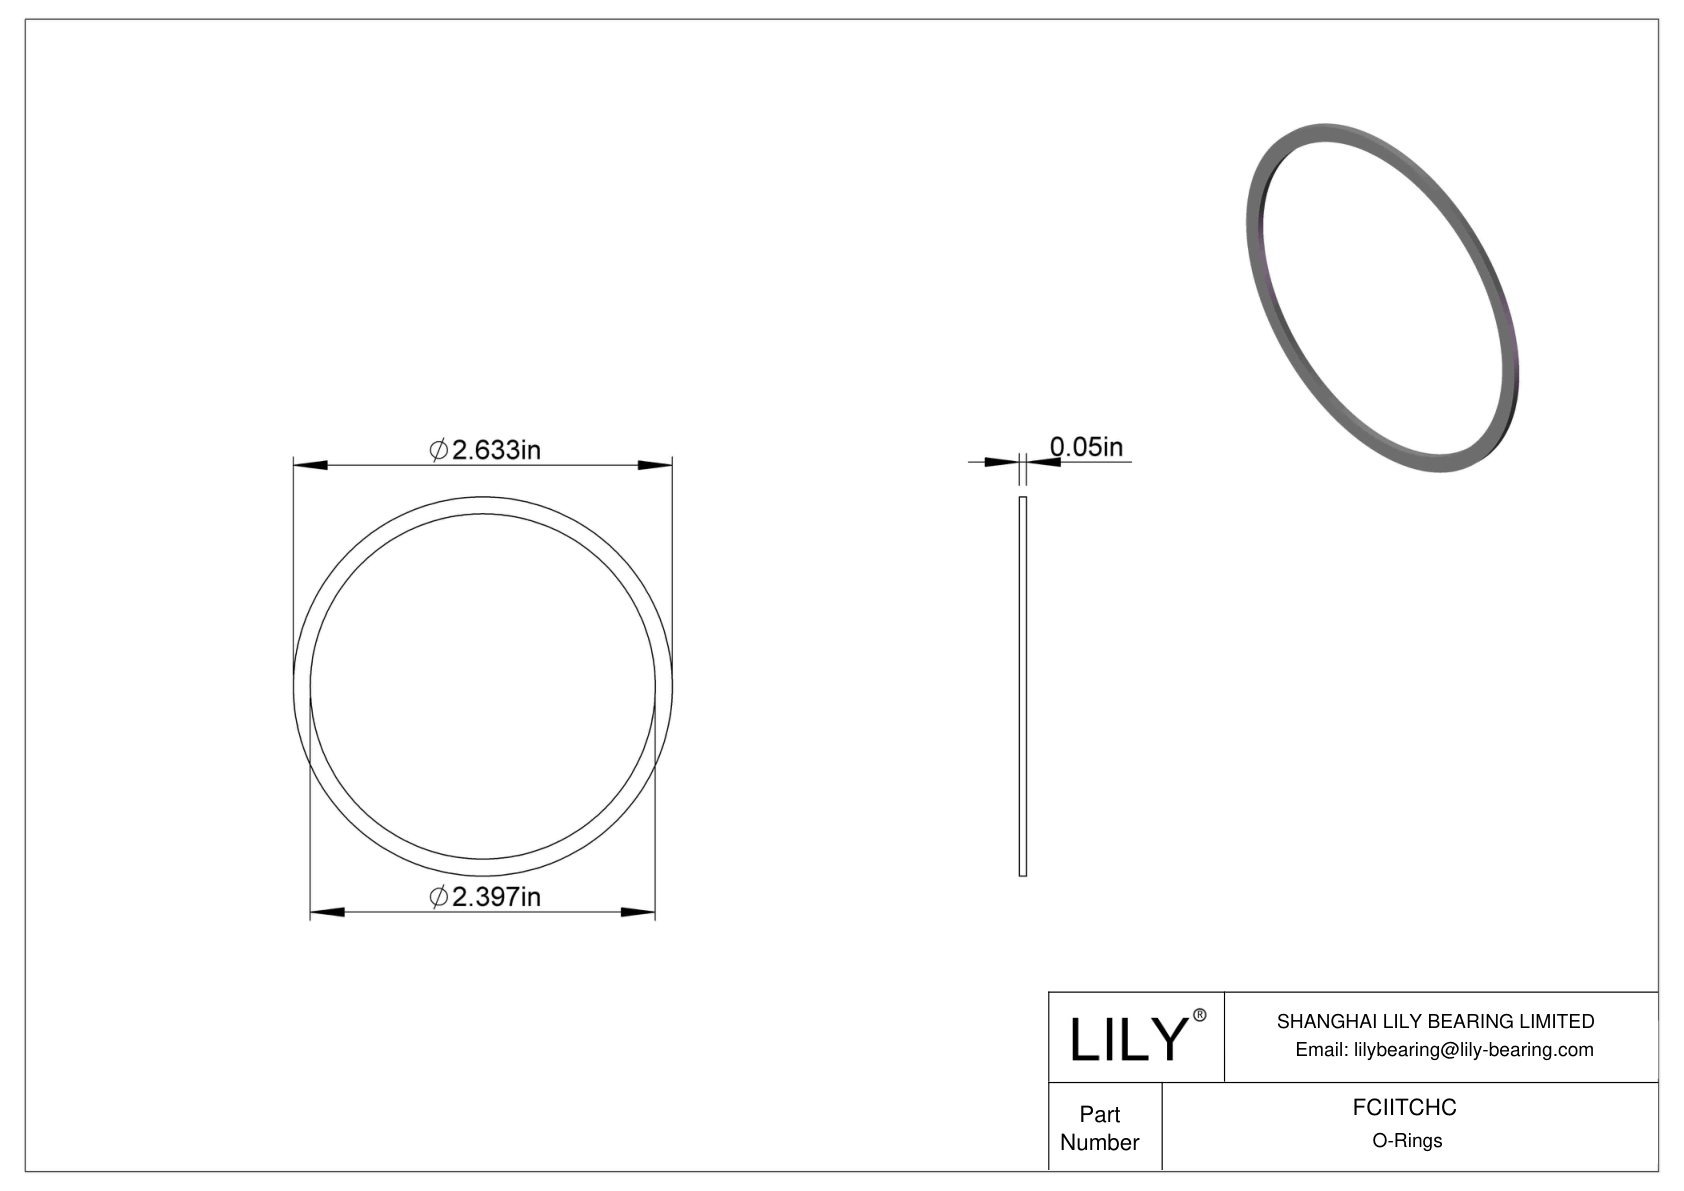 FCIITCHC O-Ring Backup Rings cad drawing